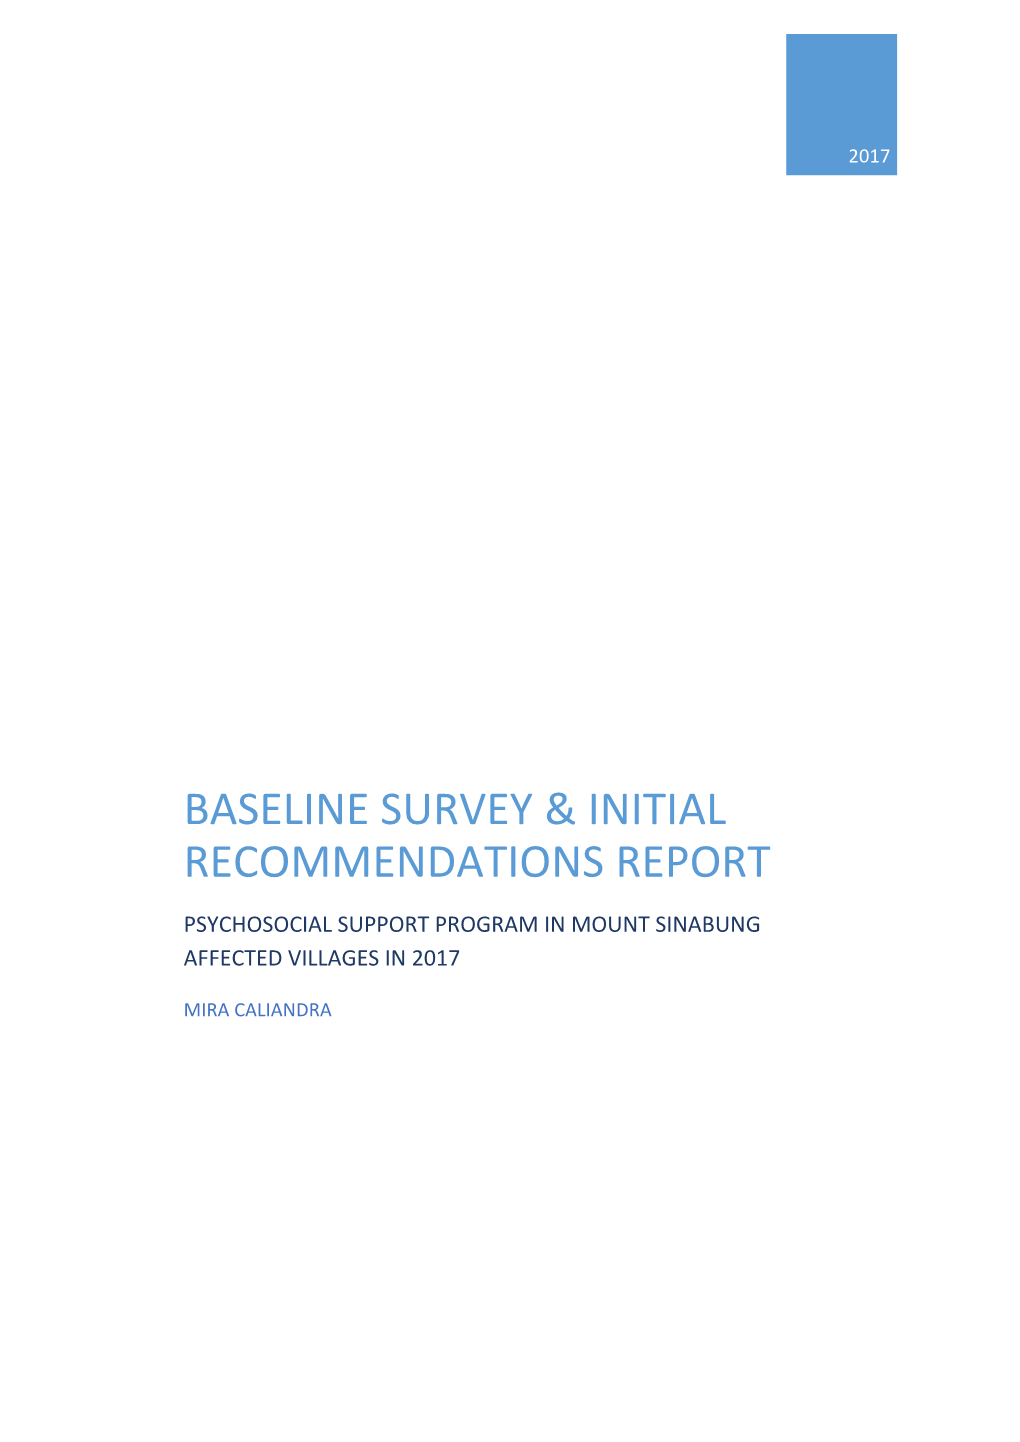 Baseline Survey & Initial Recommendations Report